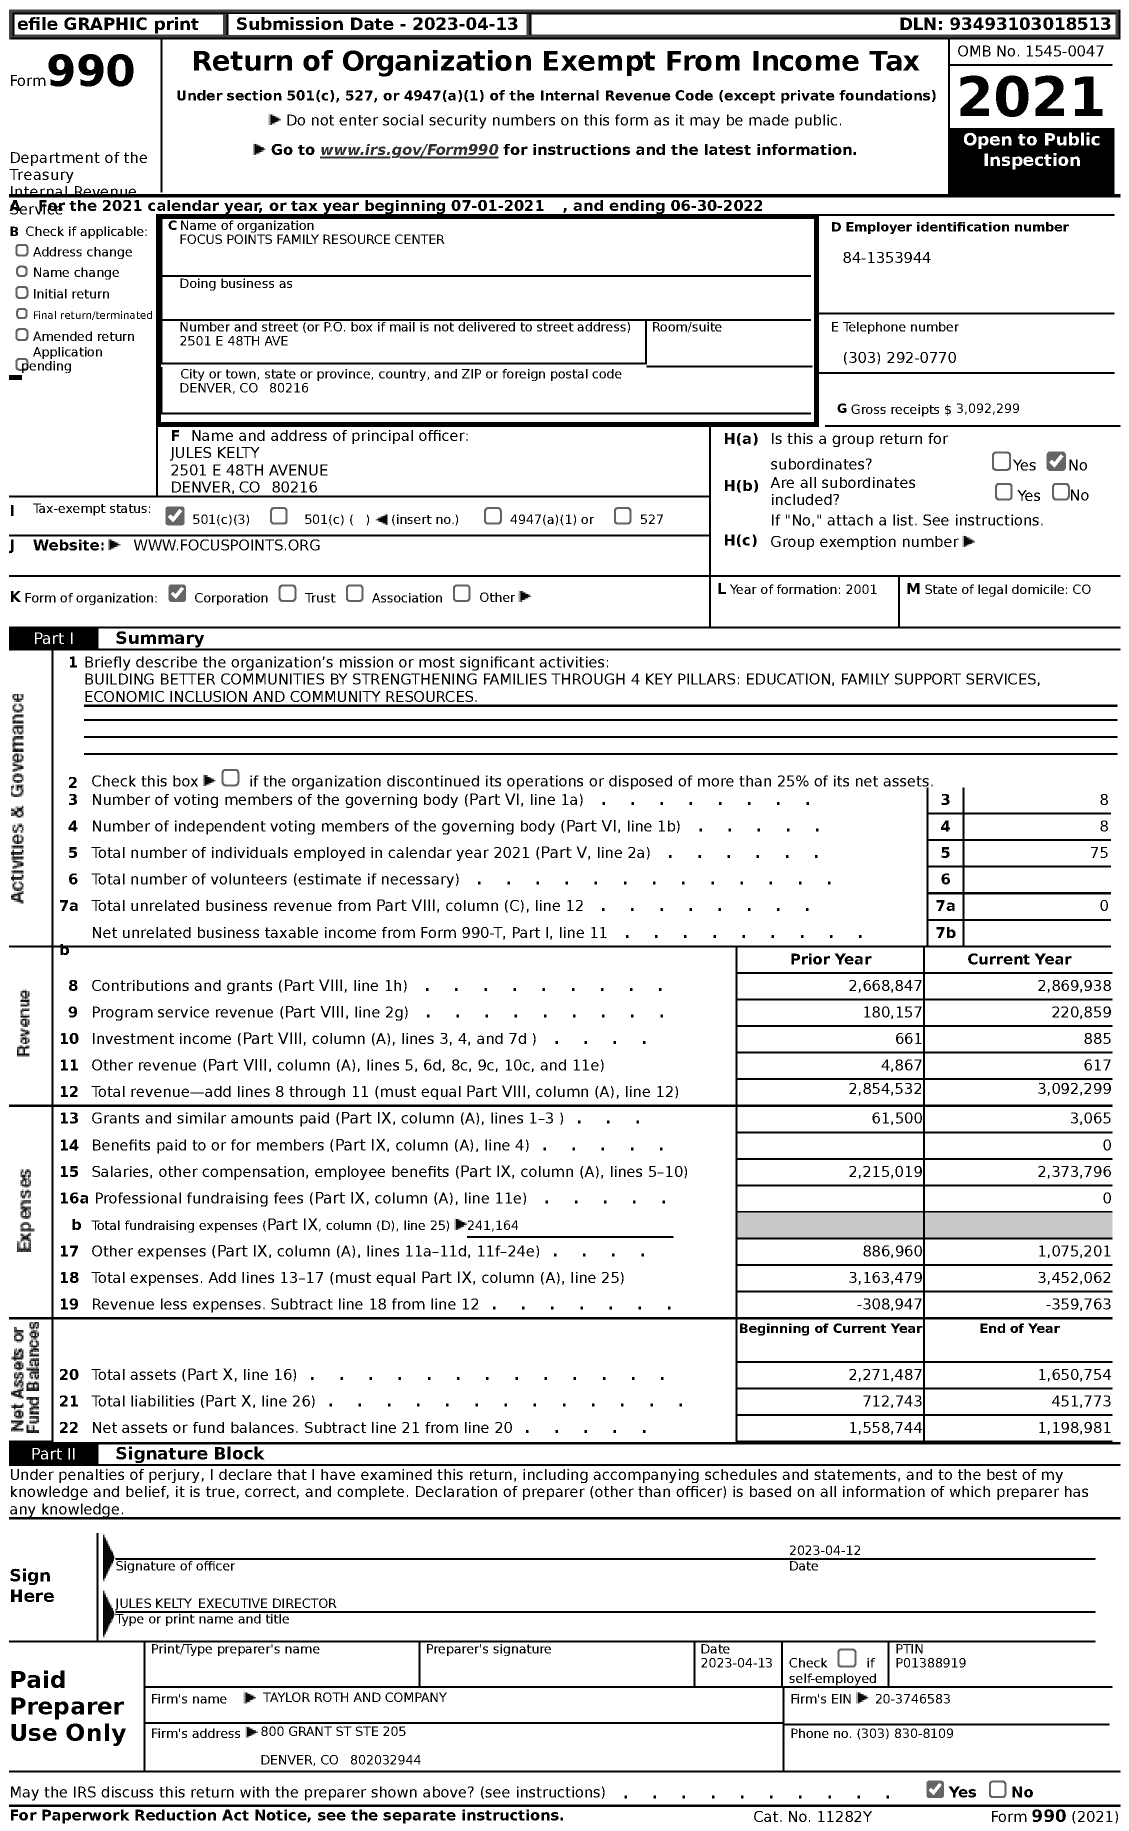 Image of first page of 2021 Form 990 for Focus Points Family Resource Center